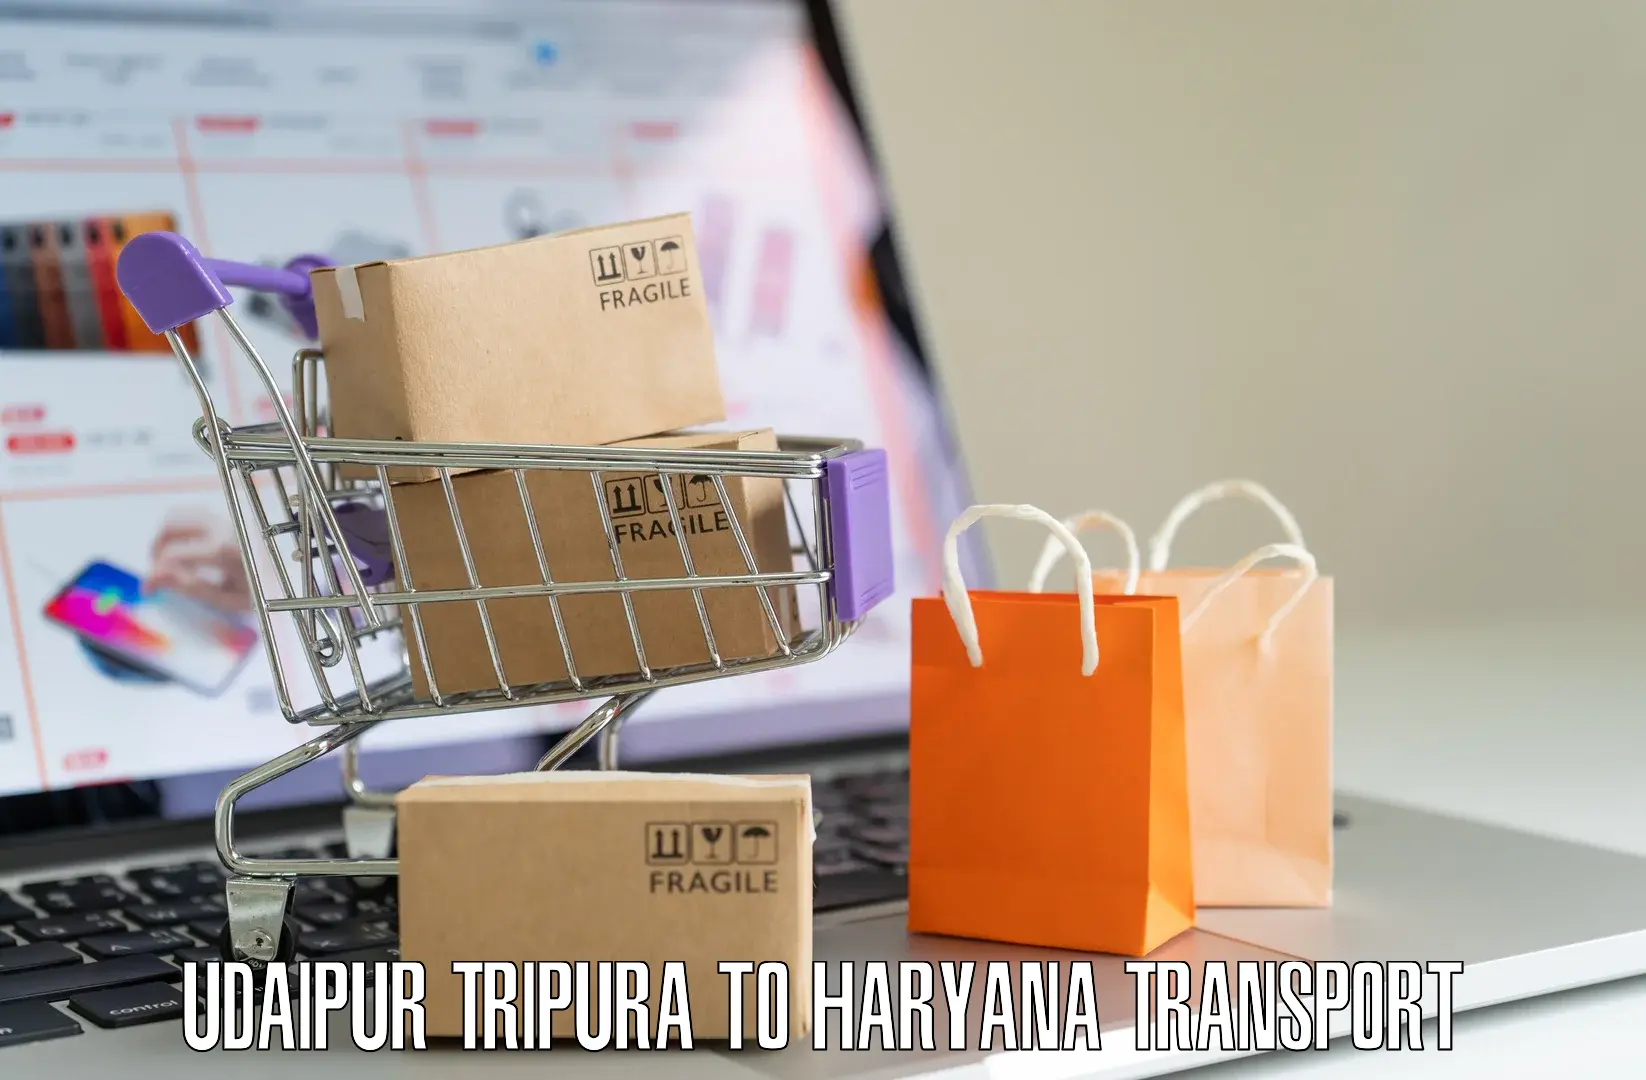 Goods delivery service Udaipur Tripura to Jhajjar